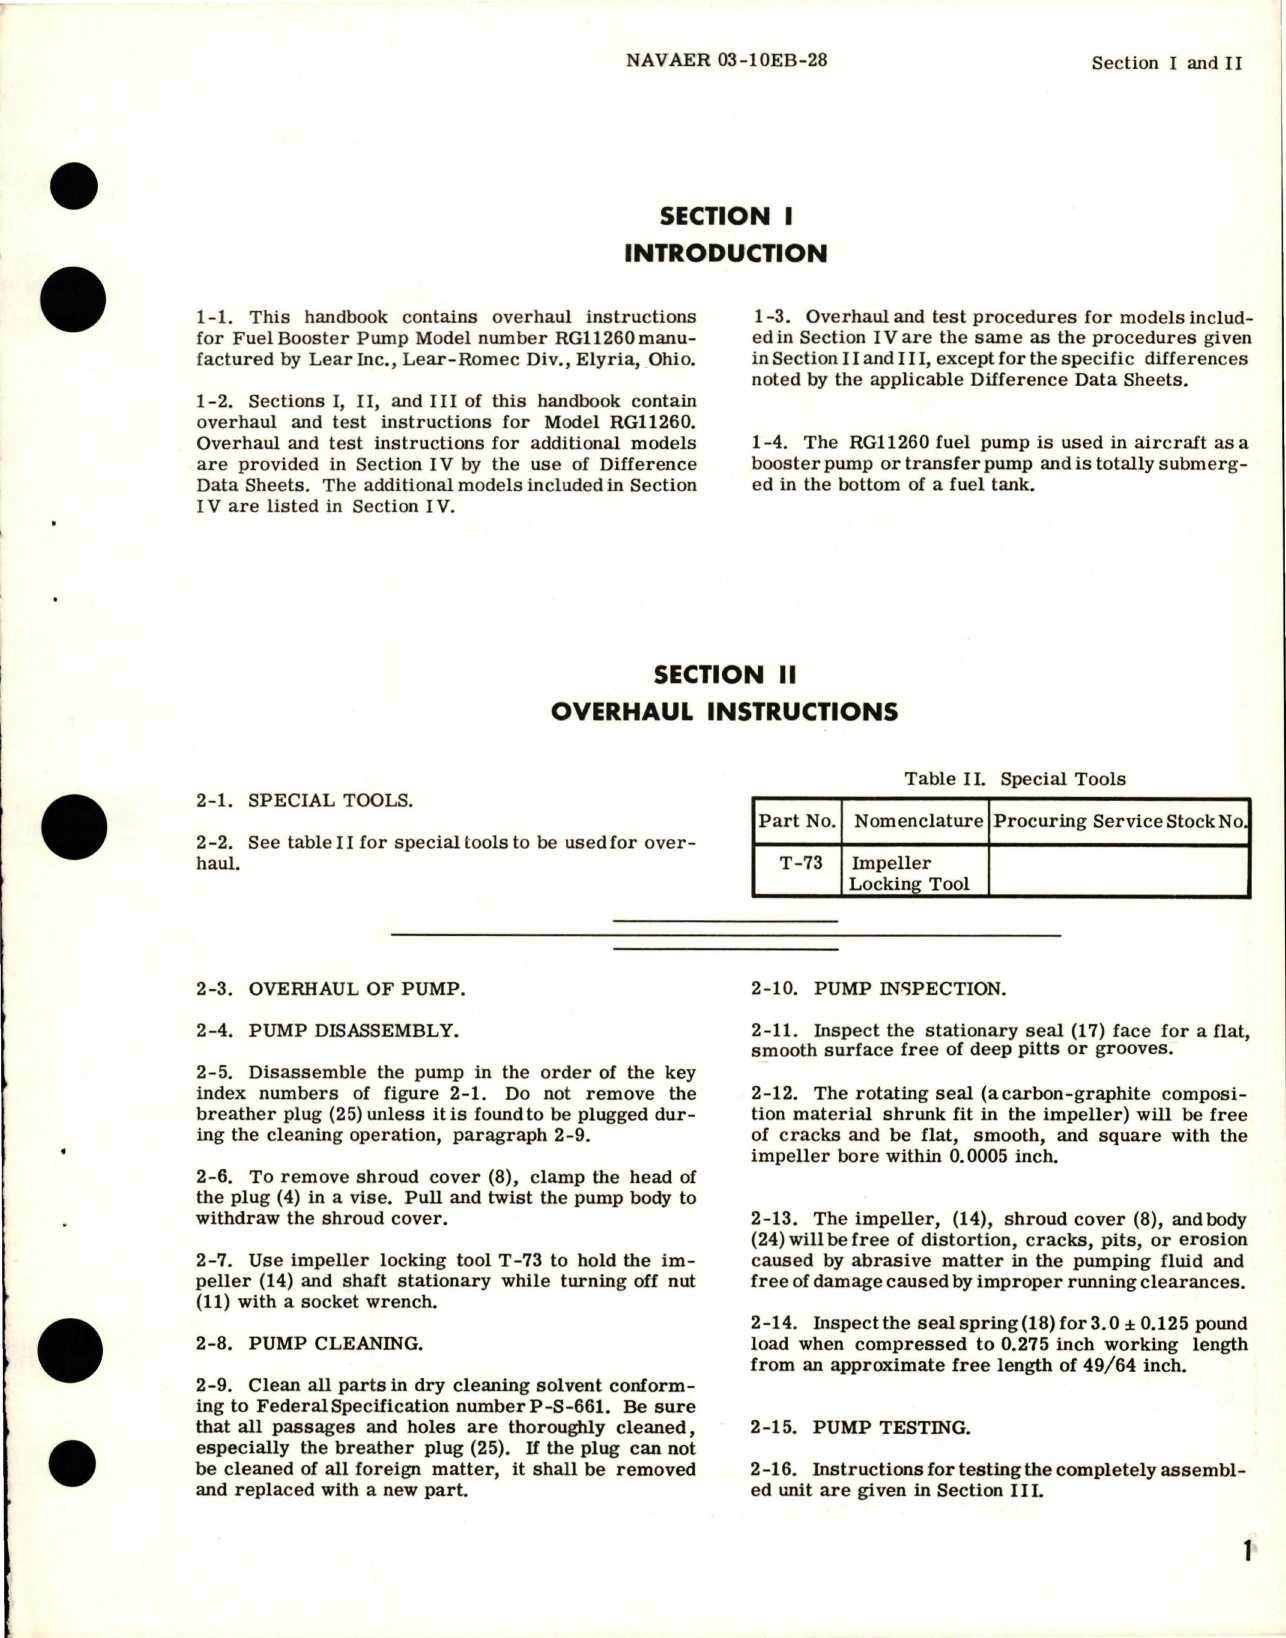 Sample page 5 from AirCorps Library document: Overhaul Instructions for Fuel Booster Pump - RG11260, RG11260A1, and RG11260A3